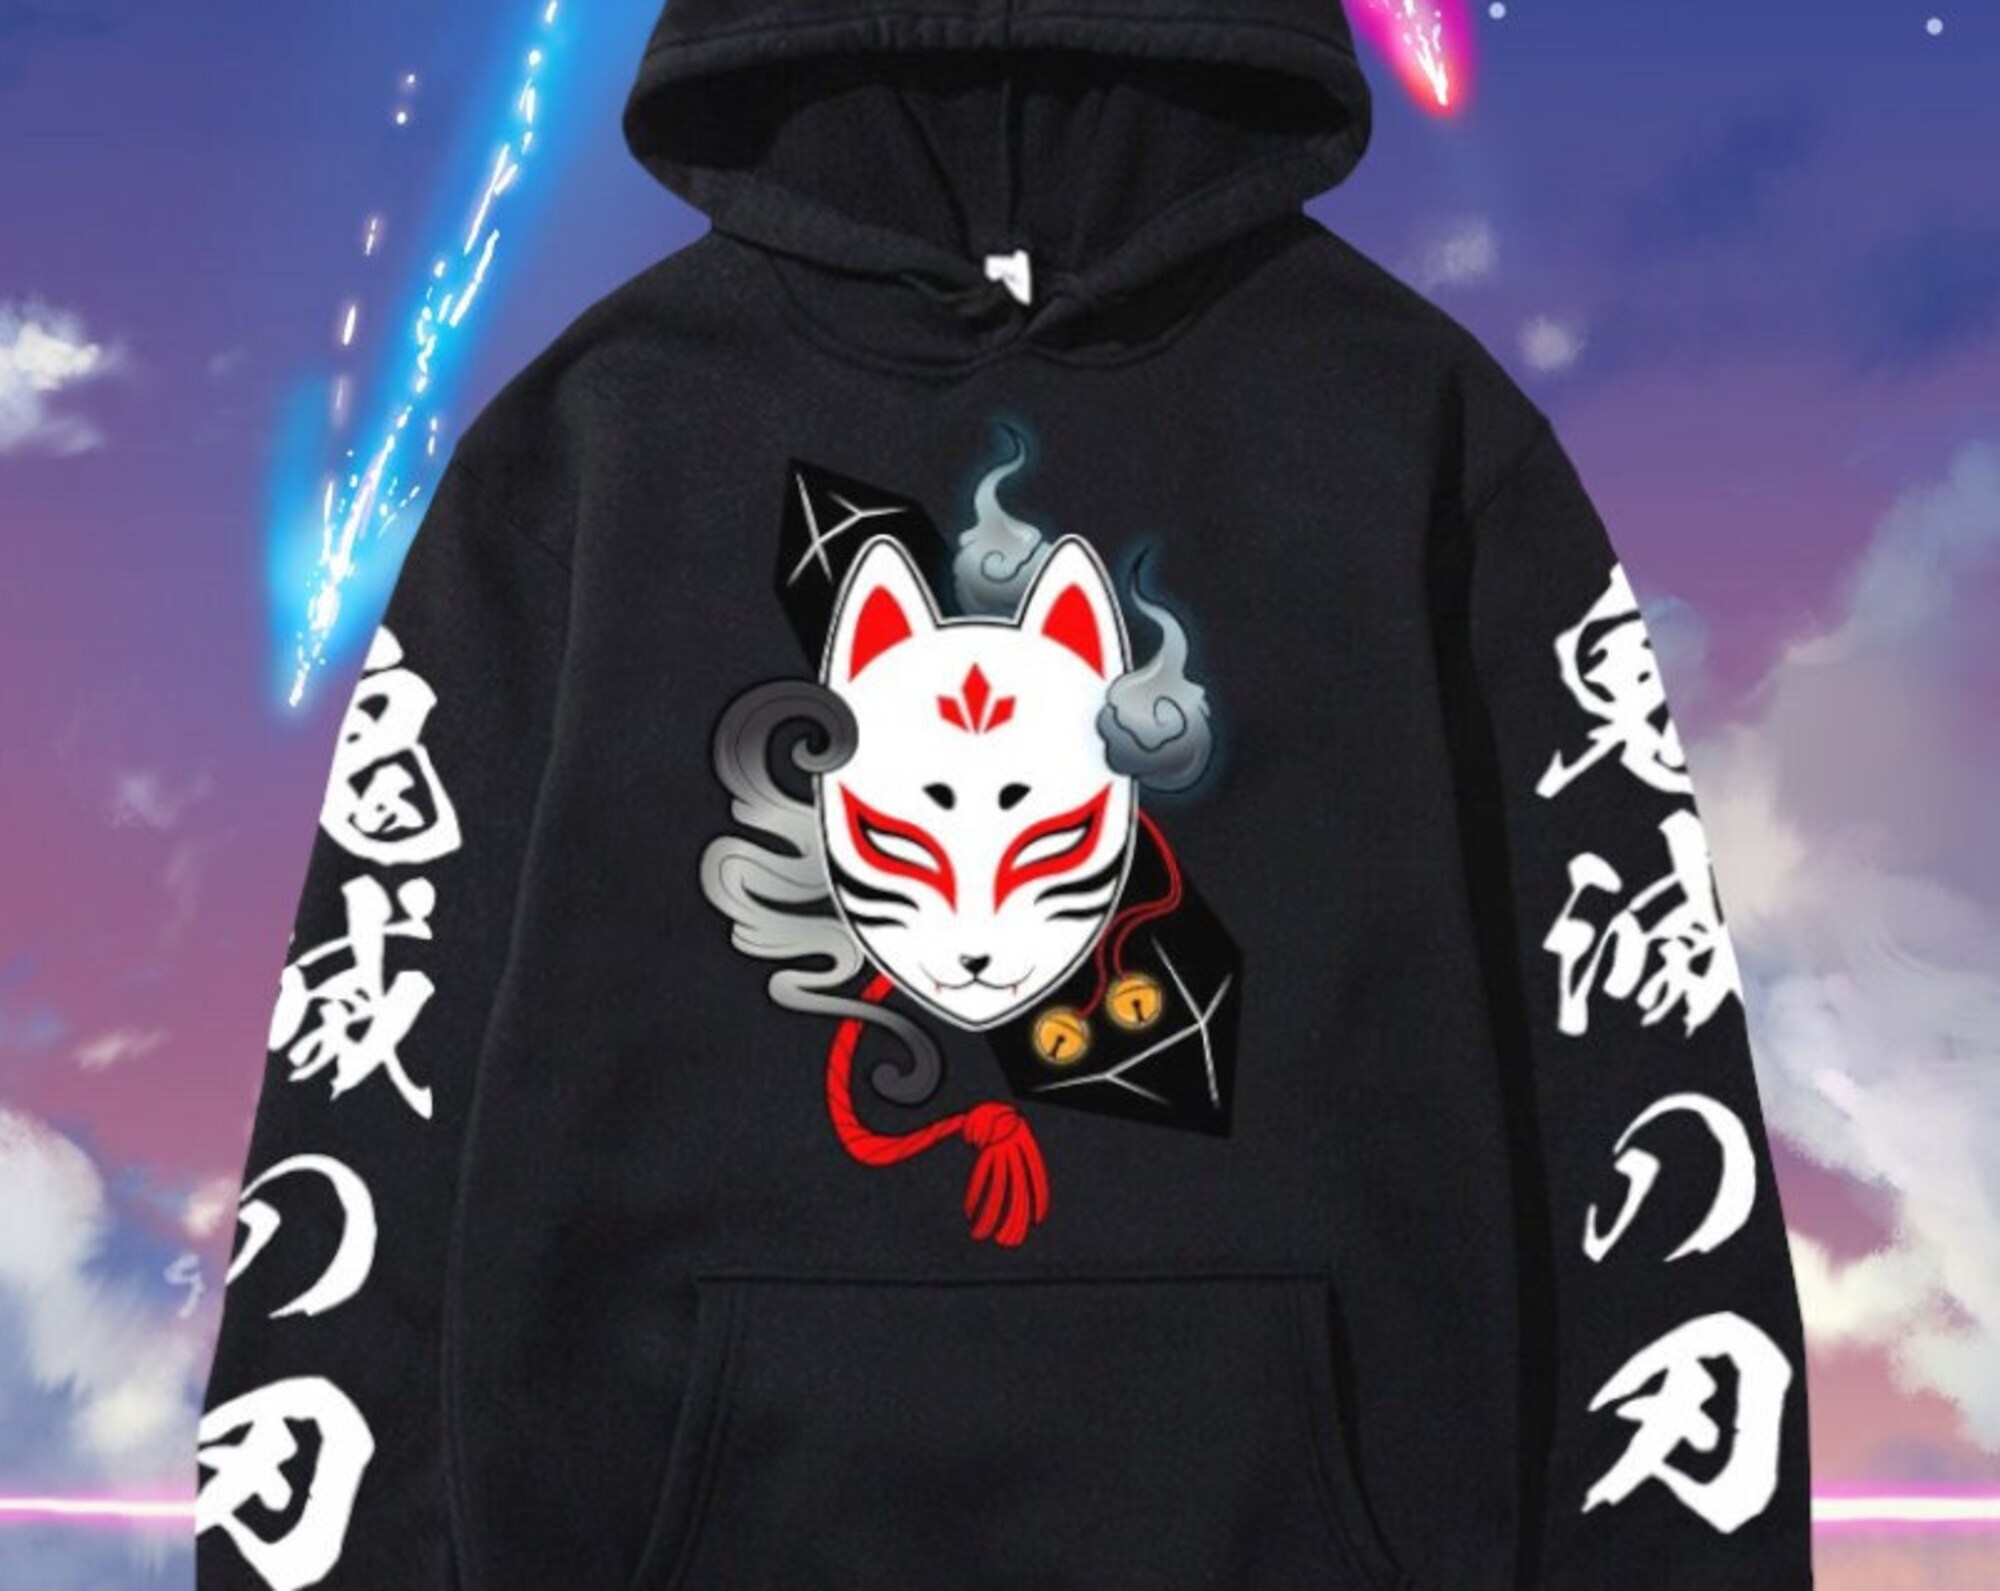 Discover Japan Anime Hoodie, Manga Clothing, Graphic Print Pullover